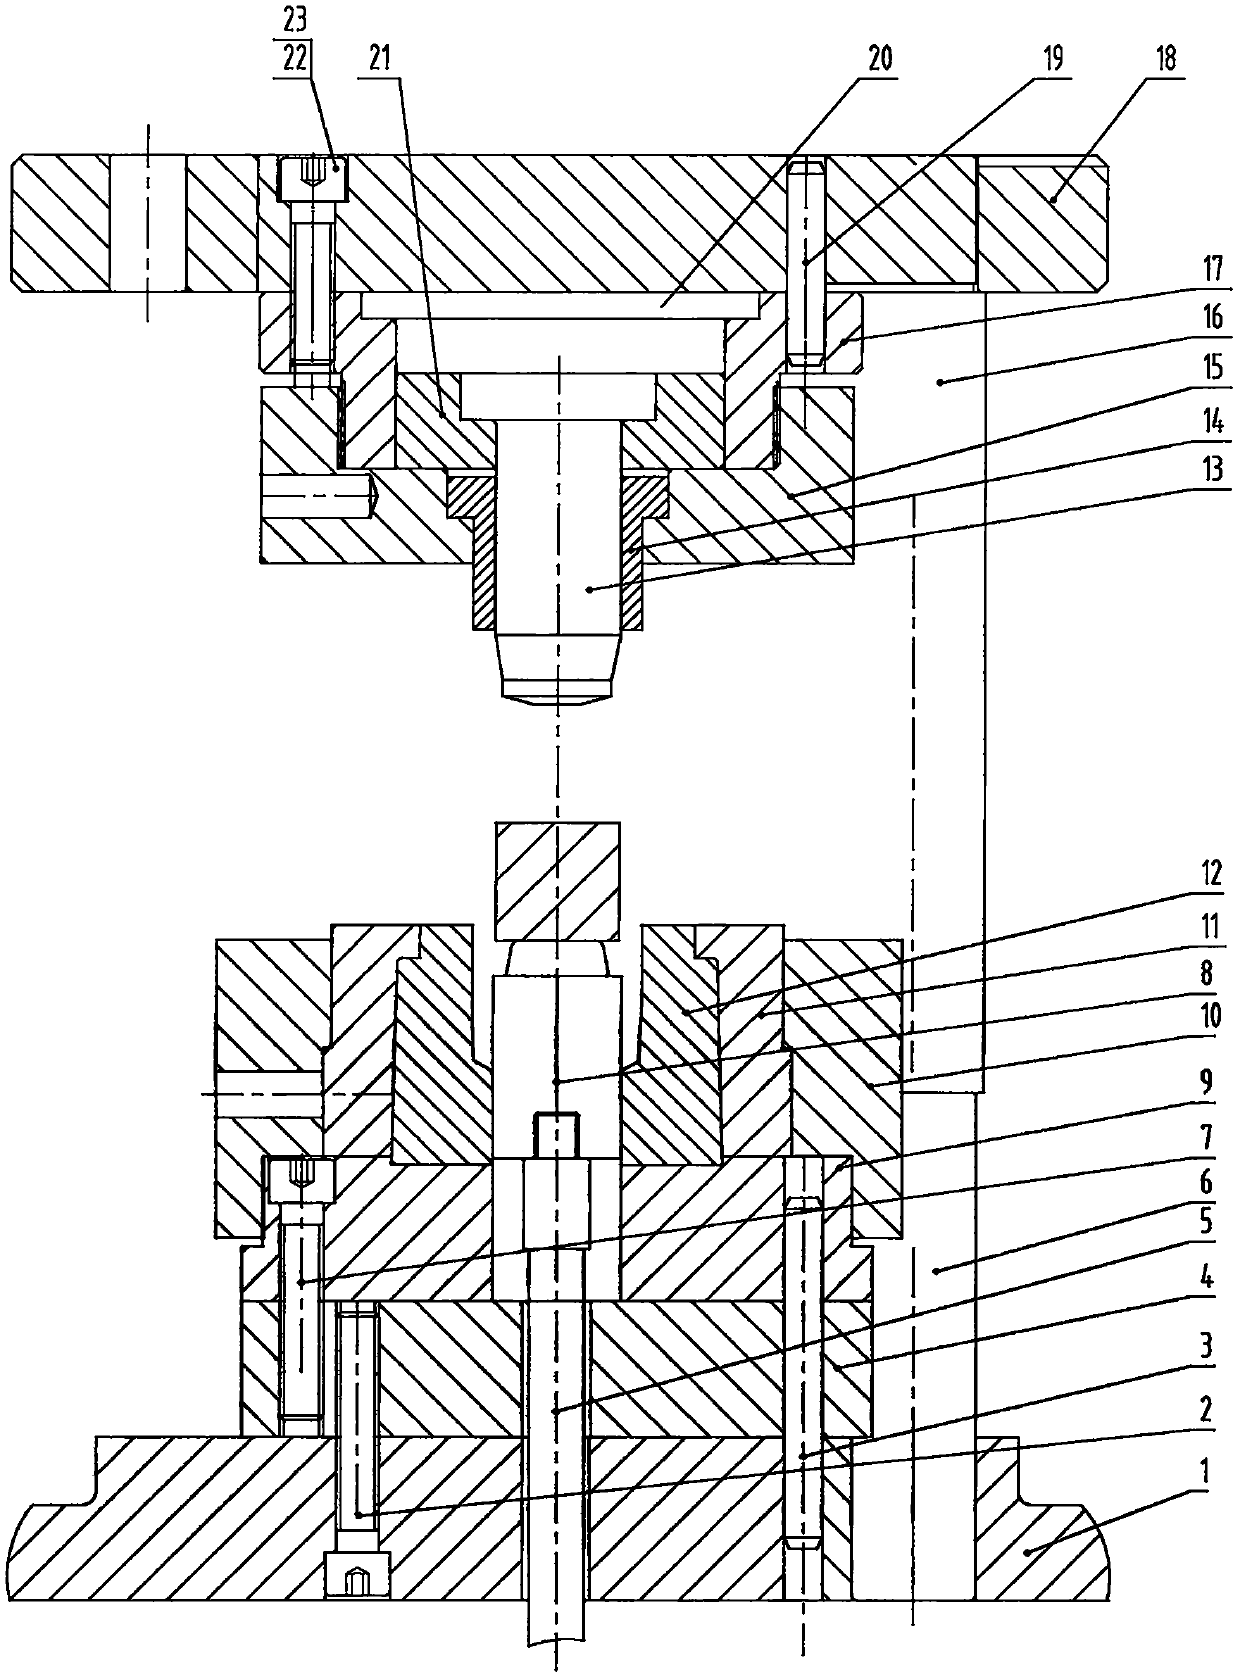 A Synchronous Extrusion Forming Method for "h" Shape Connectors Made of Steel with Different Wall Thickness